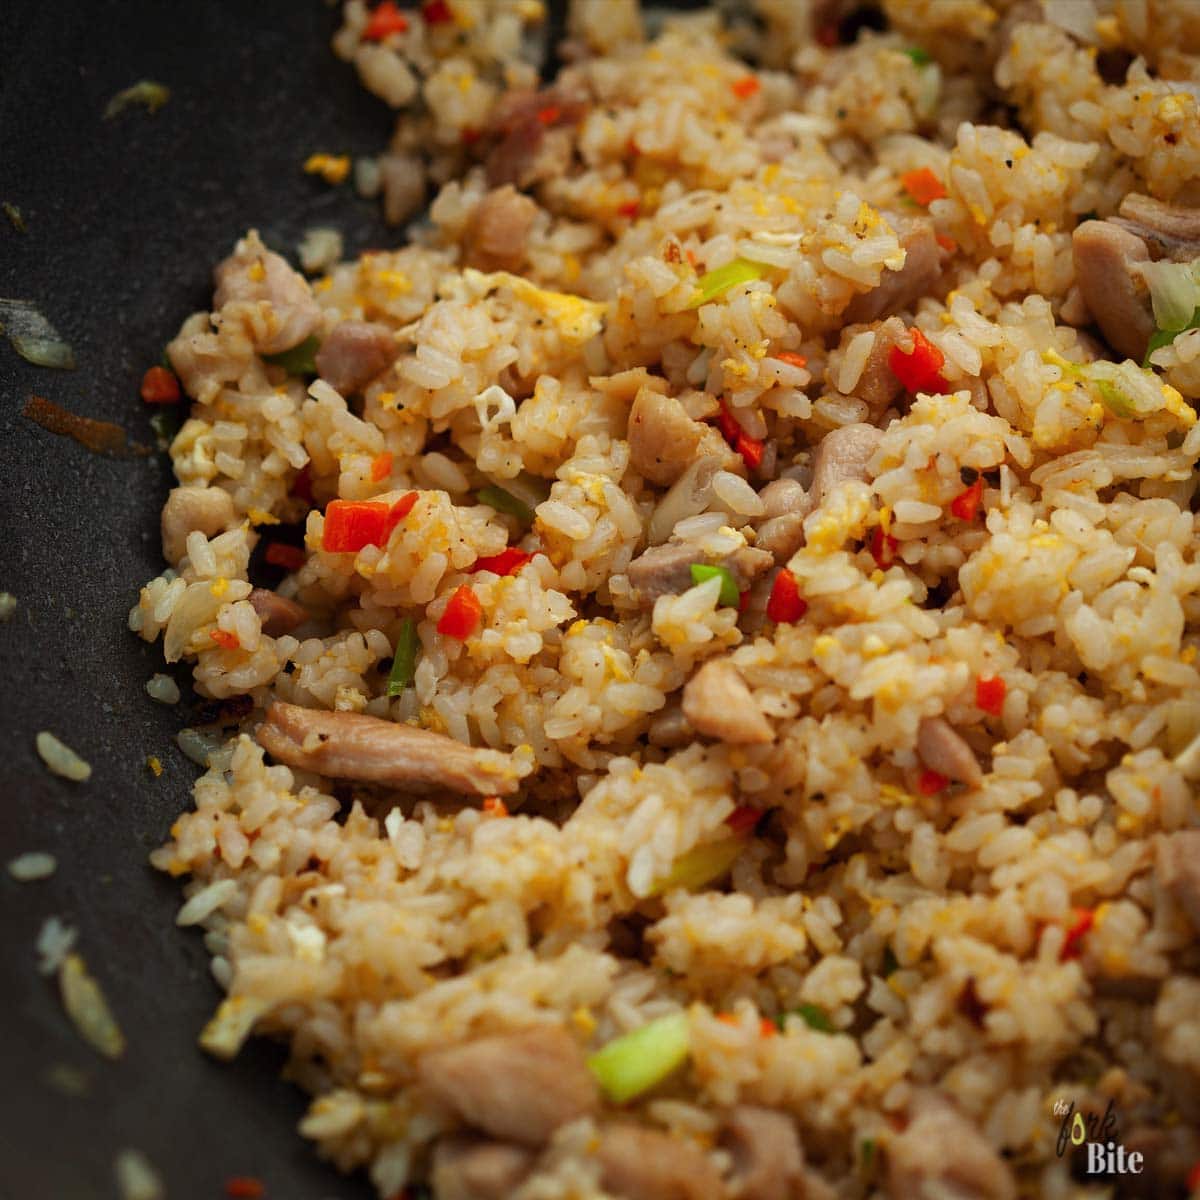 I tried and tested this trick and my fried rice worked perfectly fine. All you have to do is spread out the rice on a plate or tray while it's hot. Give it some time for its surface moisture to evaporate, and you can use it to make some excellent fried rice.